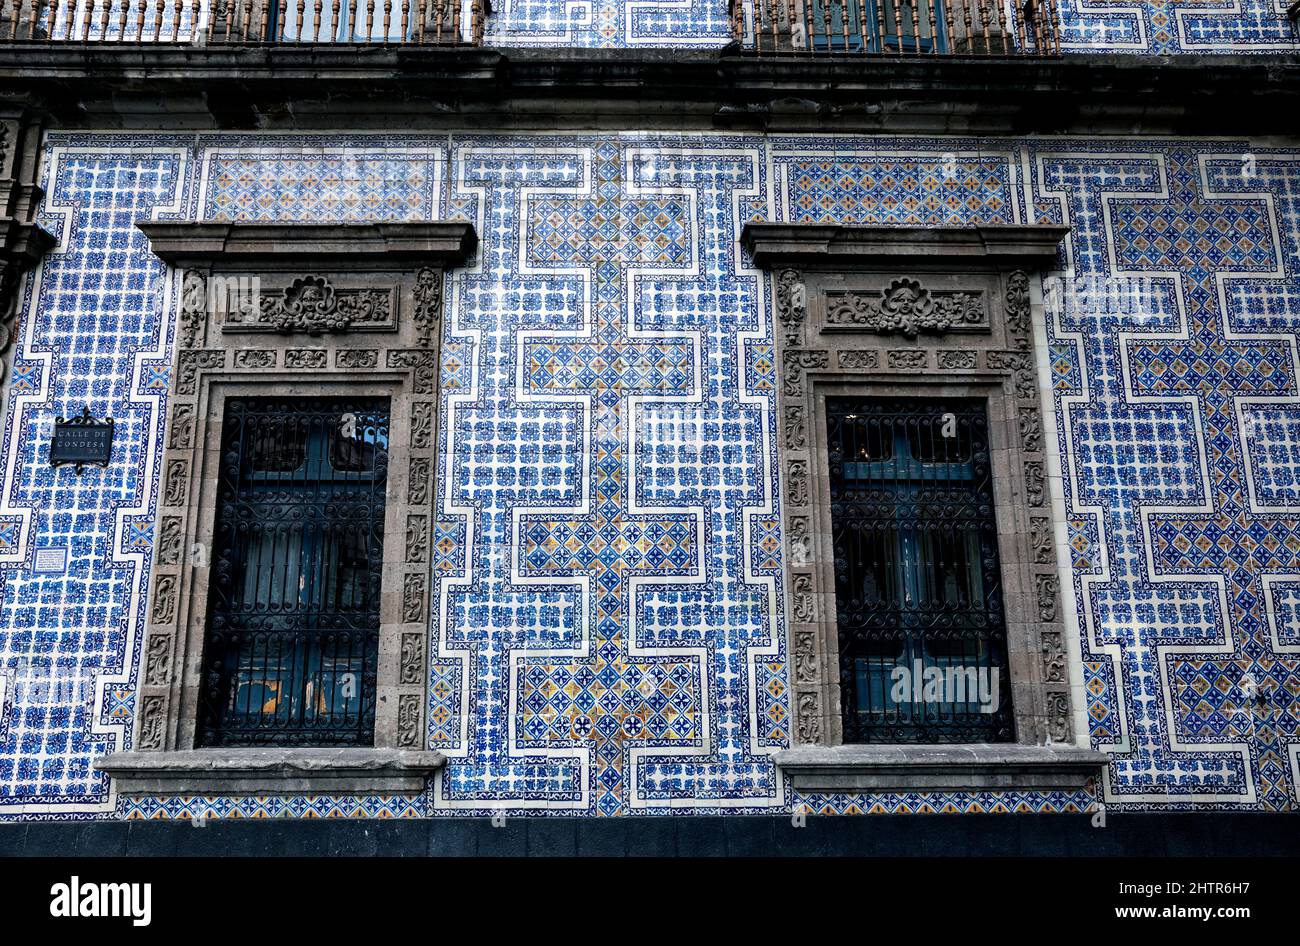 The Casa de los Azulejos or 'House of Tiles' is an 18th-century Baroque palace in Mexico City, built by the Count of the Valle de Orizaba family. Stock Photo